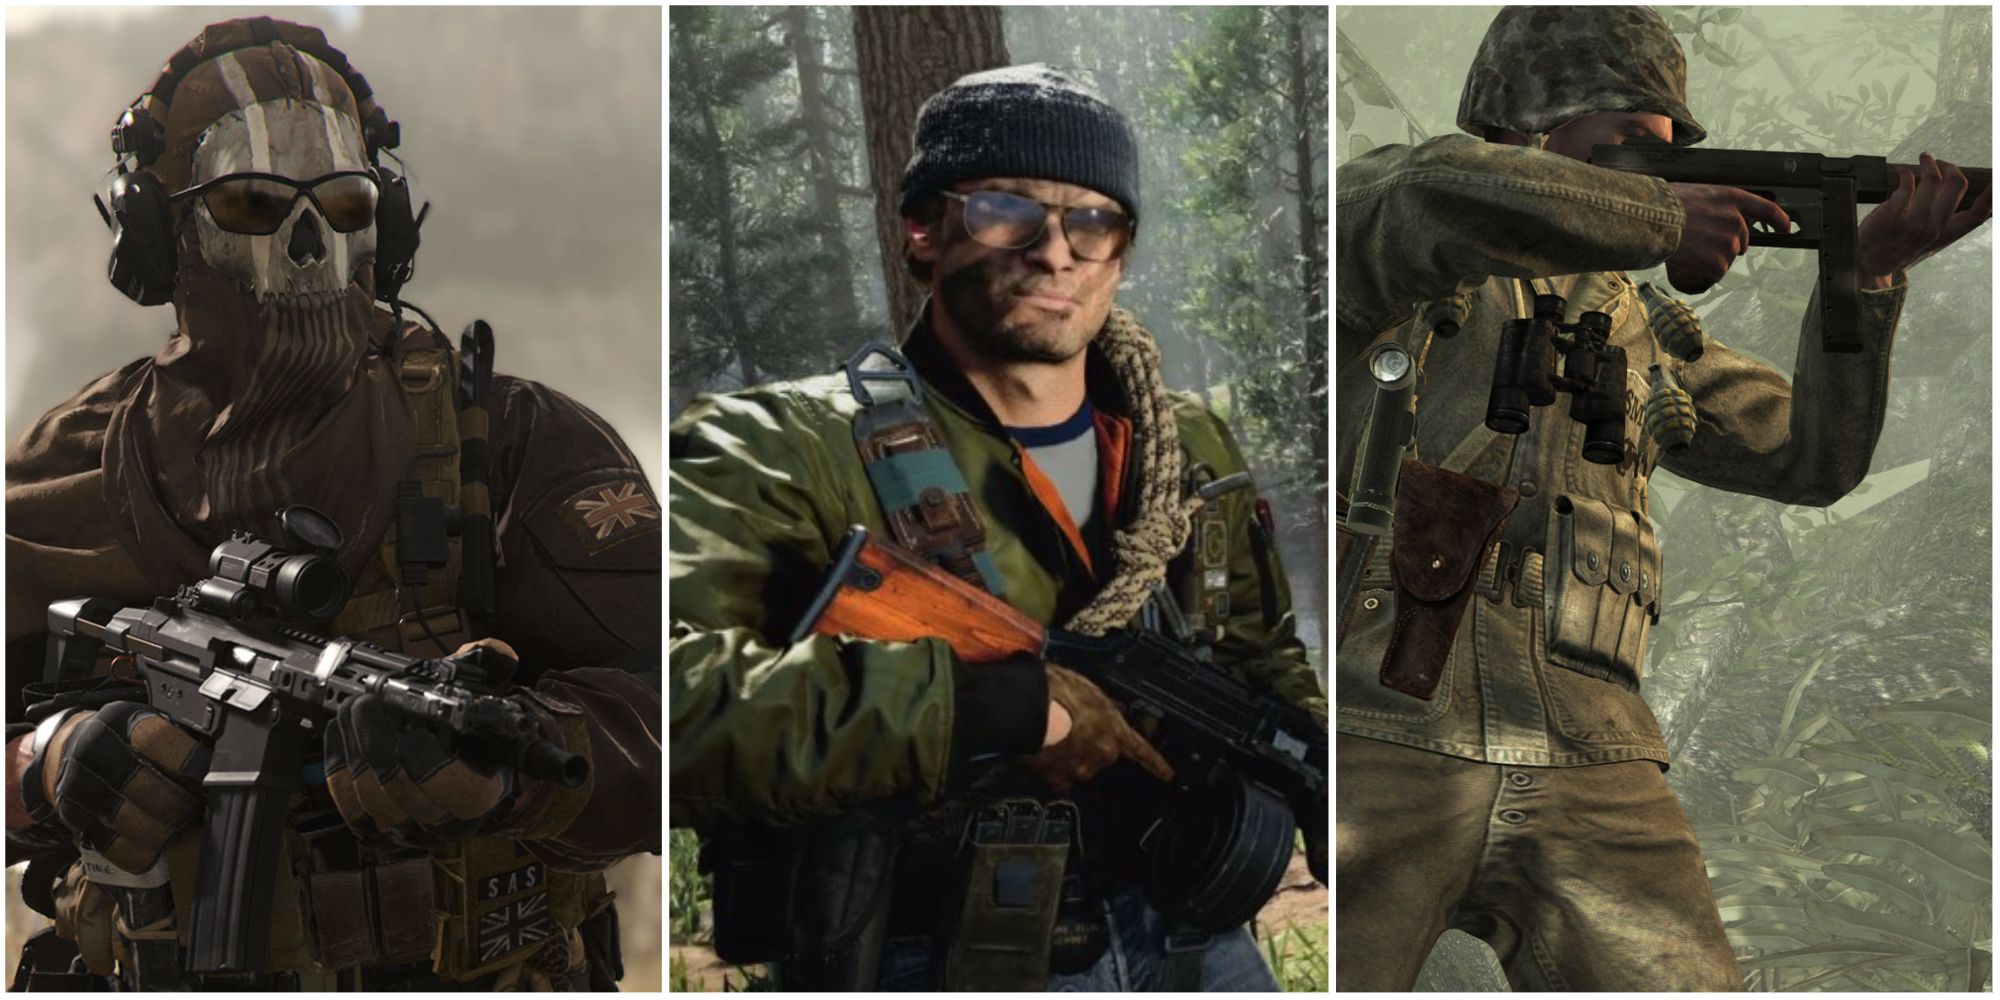 Call Of Duty: Modern Warfare's Story - Returning Characters And